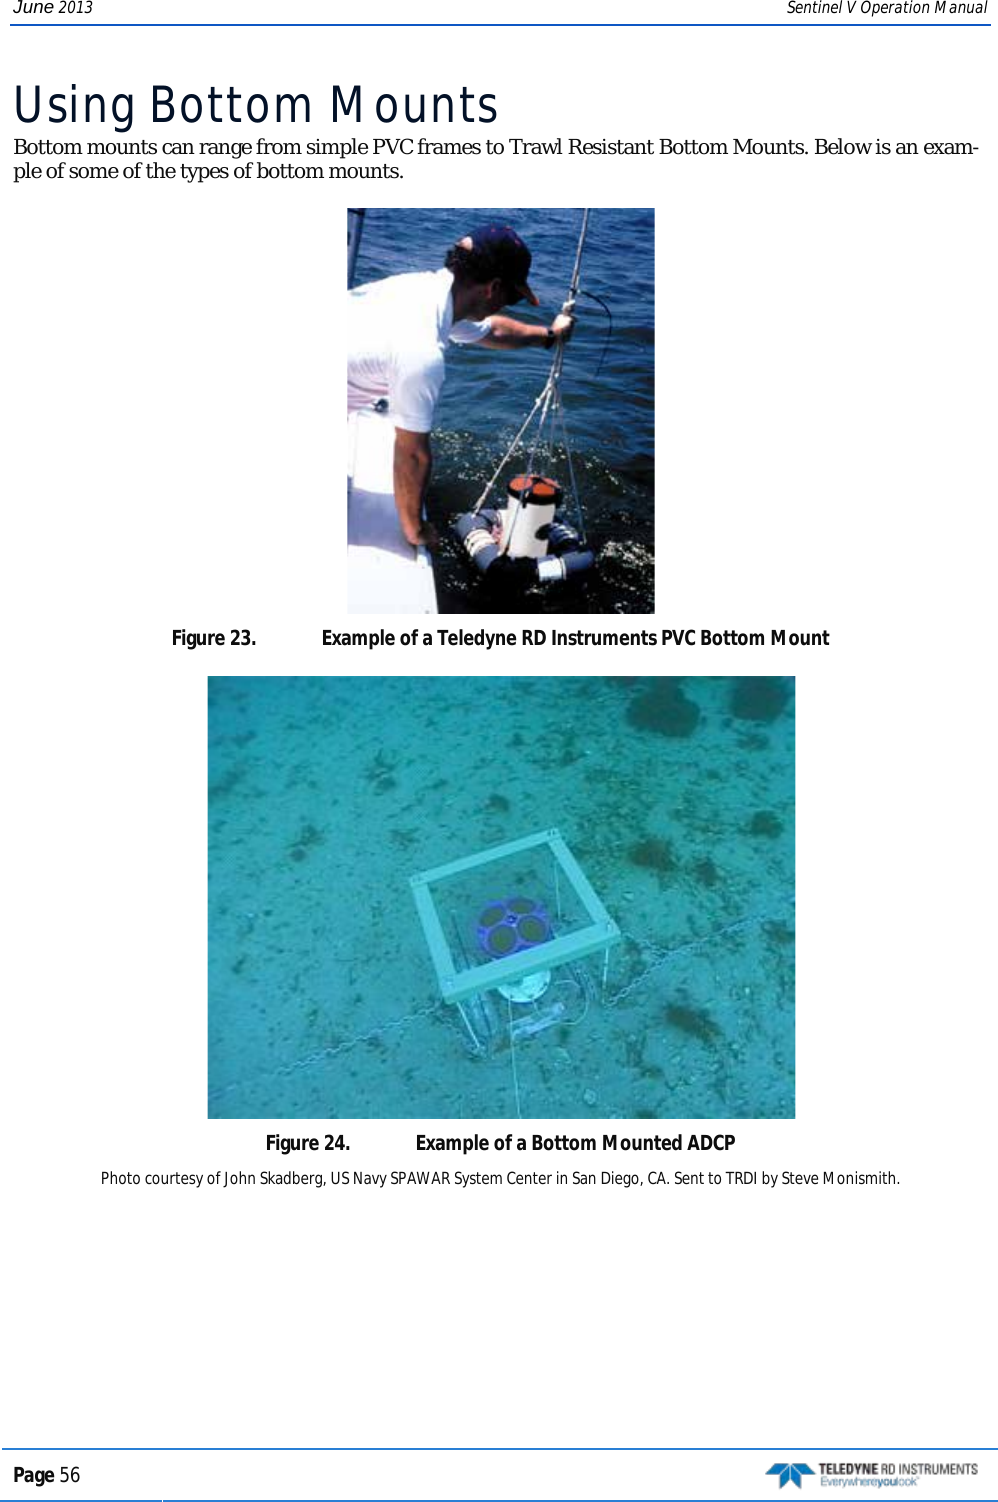 June 2013 Sentinel V Operation Manual Using Bottom Mounts Bottom mounts can range from simple PVC frames to Trawl Resistant Bottom Mounts. Below is an exam-ple of some of the types of bottom mounts.  Figure 23.  Example of a Teledyne RD Instruments PVC Bottom Mount  Figure 24.  Example of a Bottom Mounted ADCP Photo courtesy of John Skadberg, US Navy SPAWAR System Center in San Diego, CA. Sent to TRDI by Steve Monismith. Page 56   